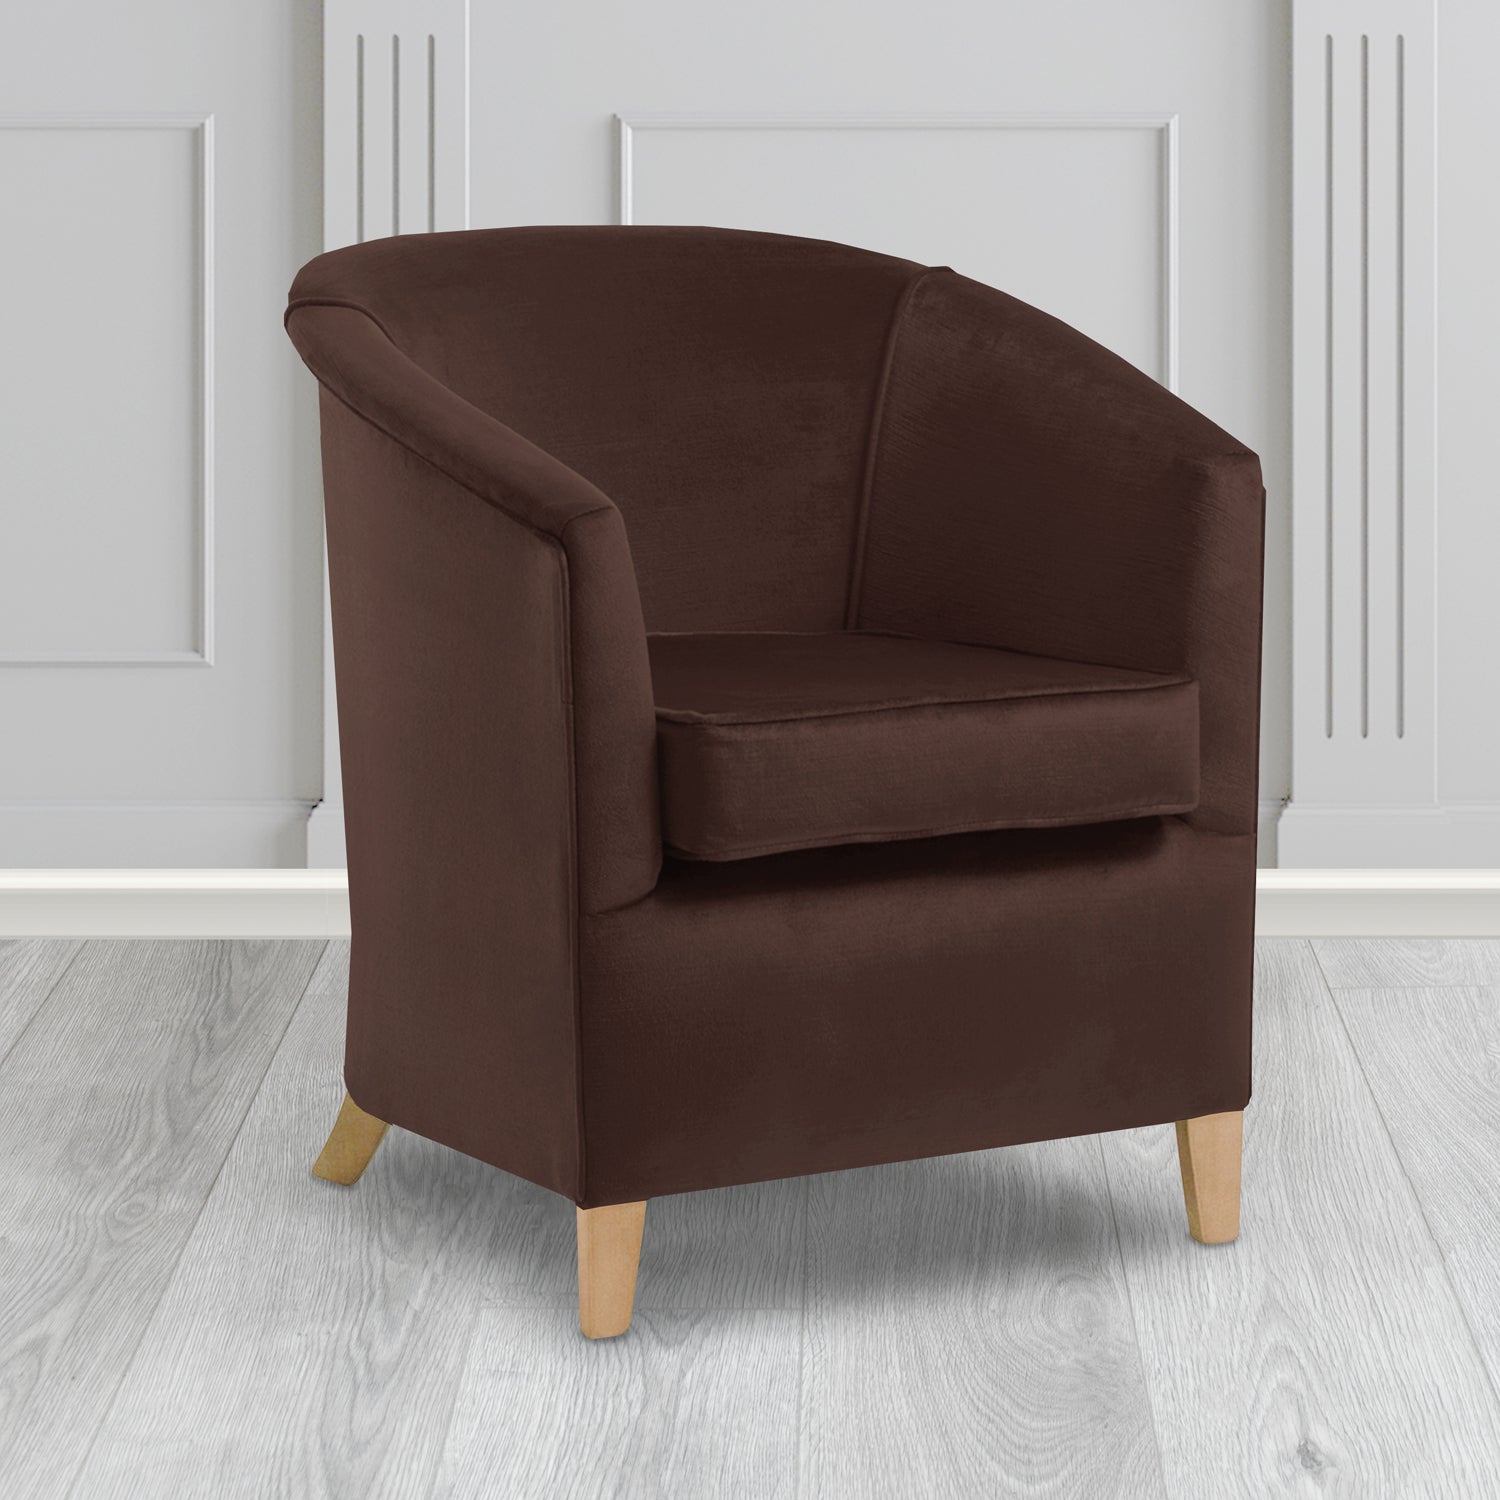 Jasmine Tub Chair in Noble 702 Chocolate Crib 5 Velvet Fabric - Water Resistant - The Tub Chair Shop